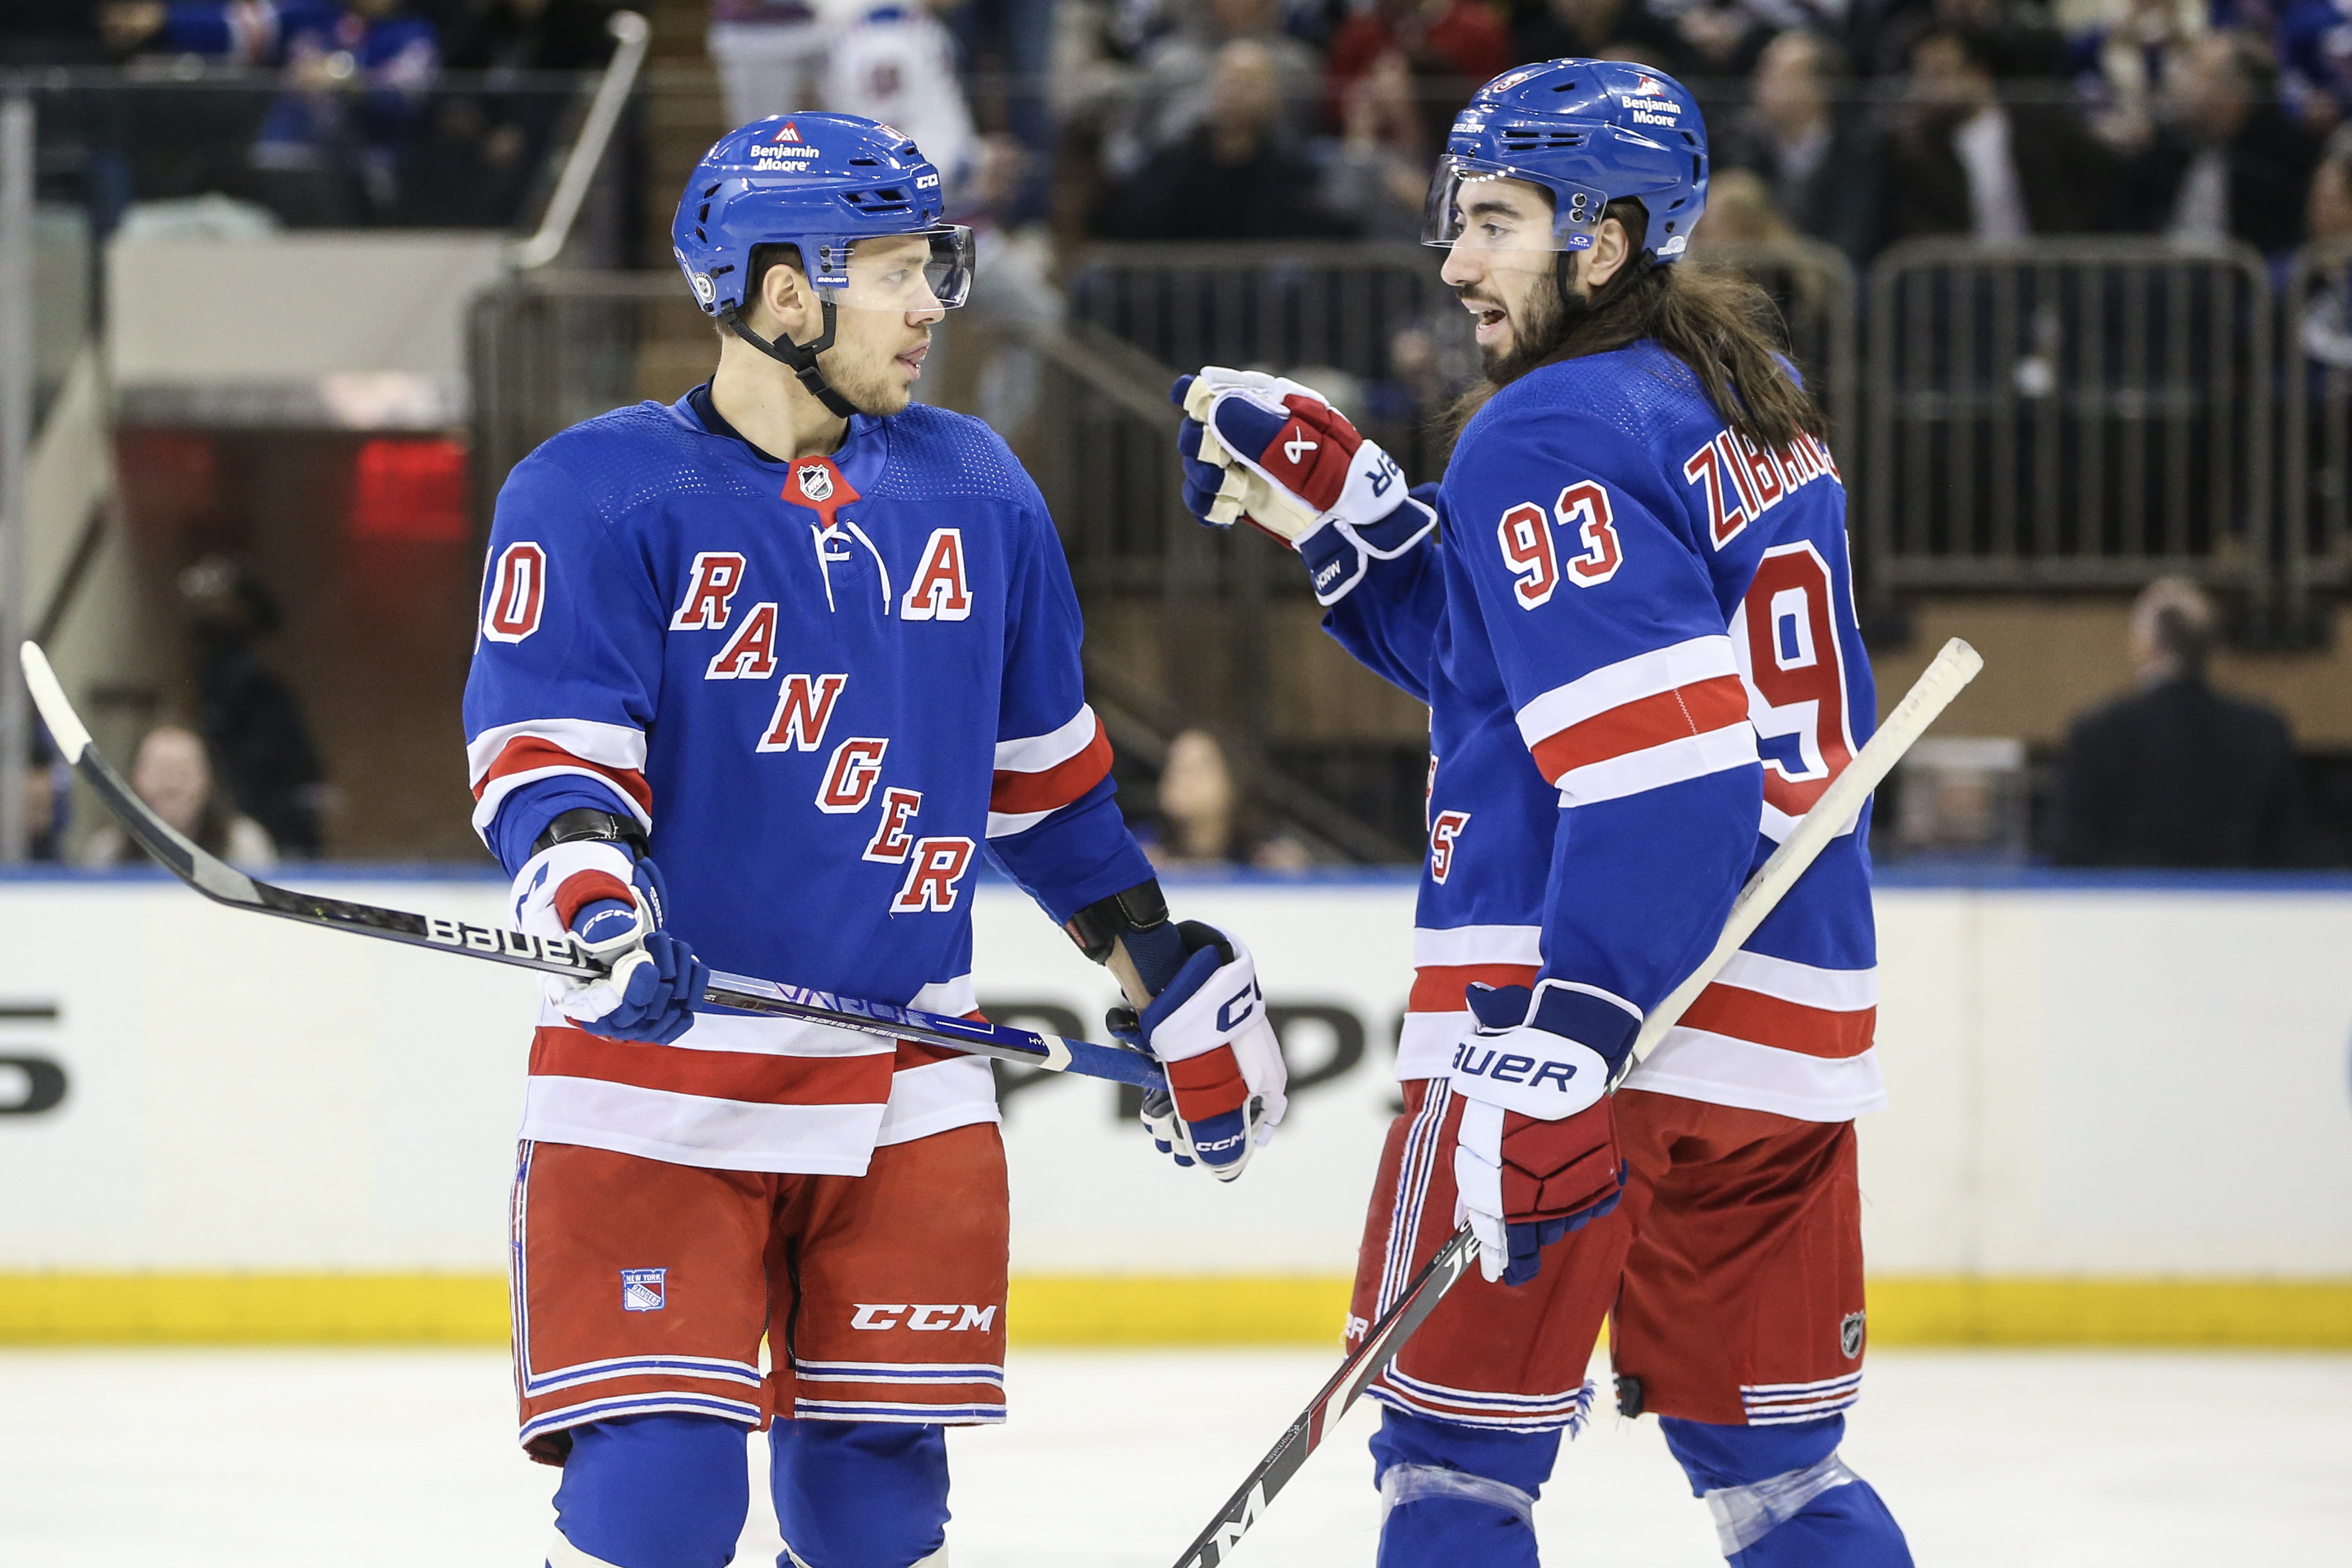 New York Rangers have lost their way after impressive start to the season